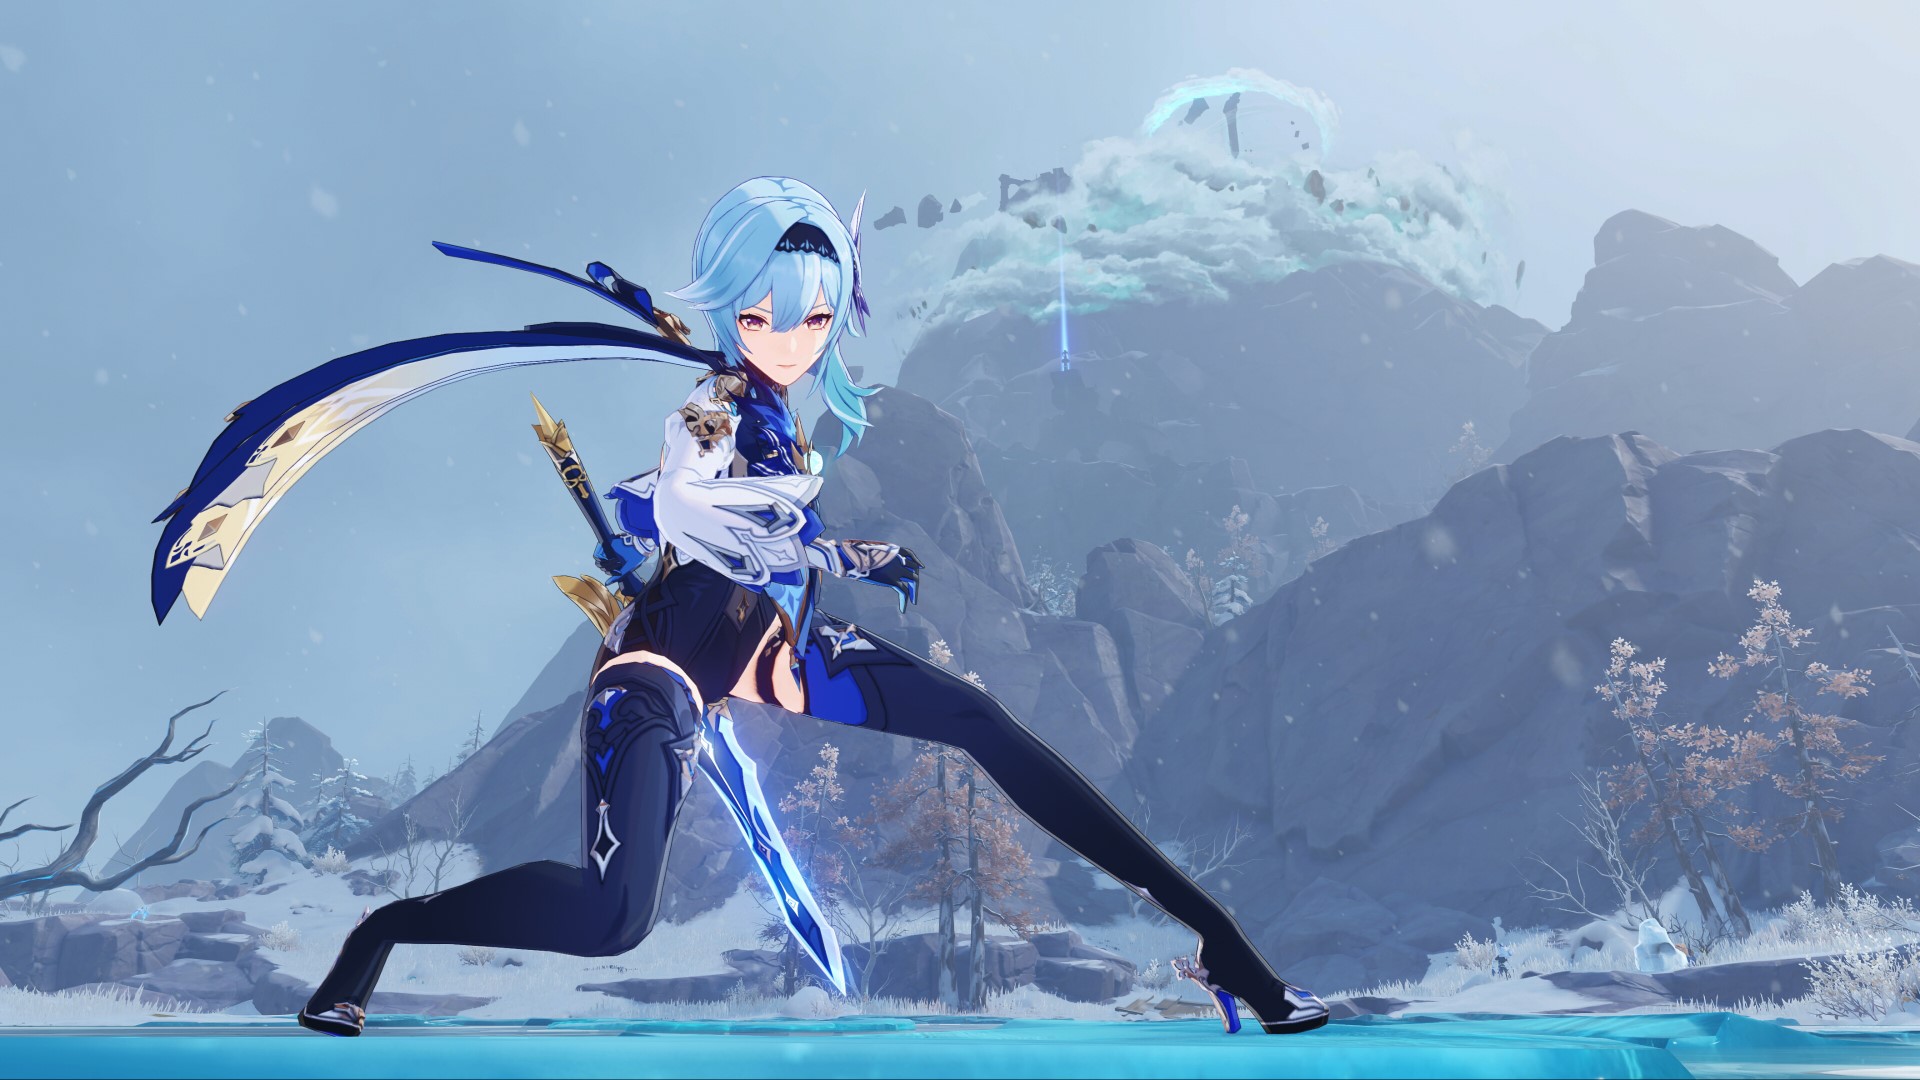 Genshin Impact's Eula swinging a claymore on a frozen lake in Dragonspine